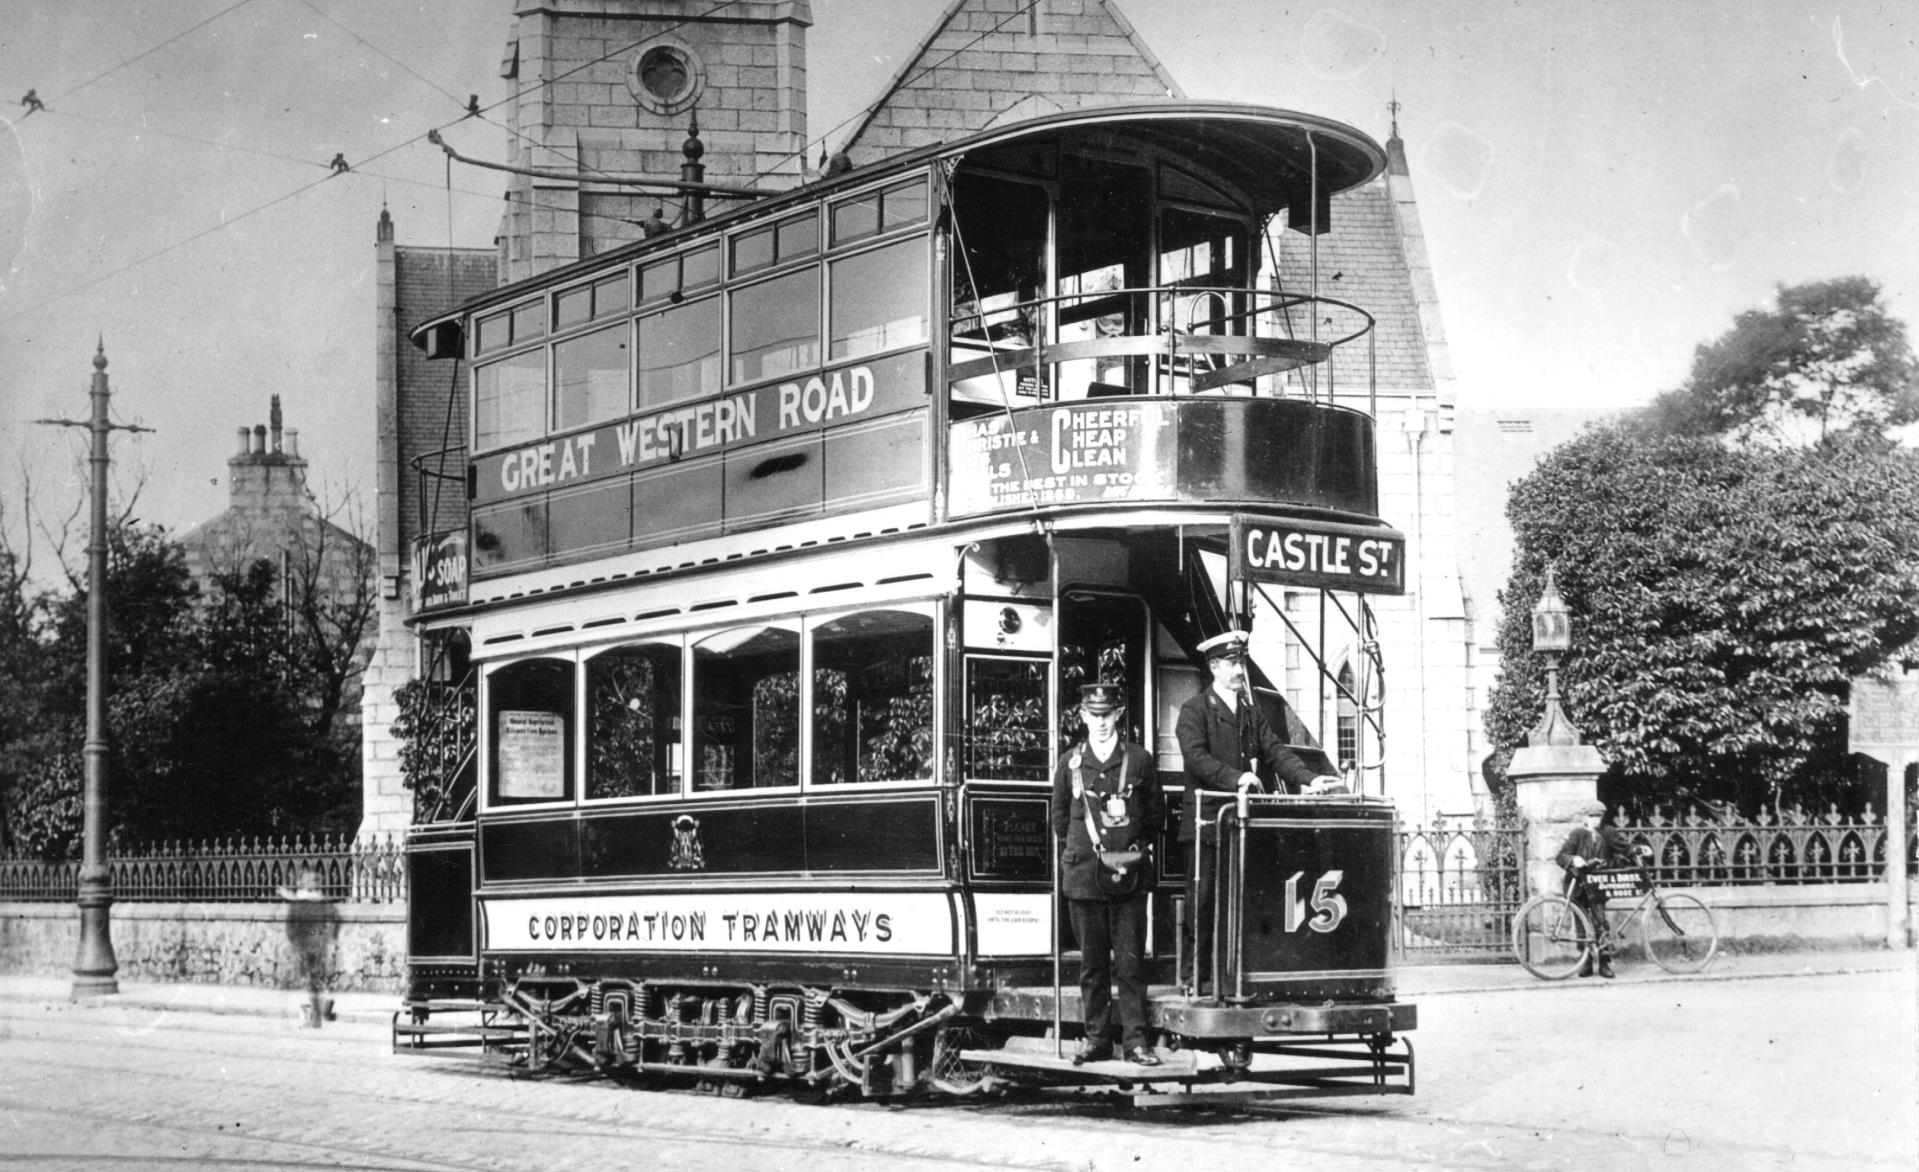 Tram 15 in service at Mannofield terminus not long after it had been fitted with a top cover in the 1920s.